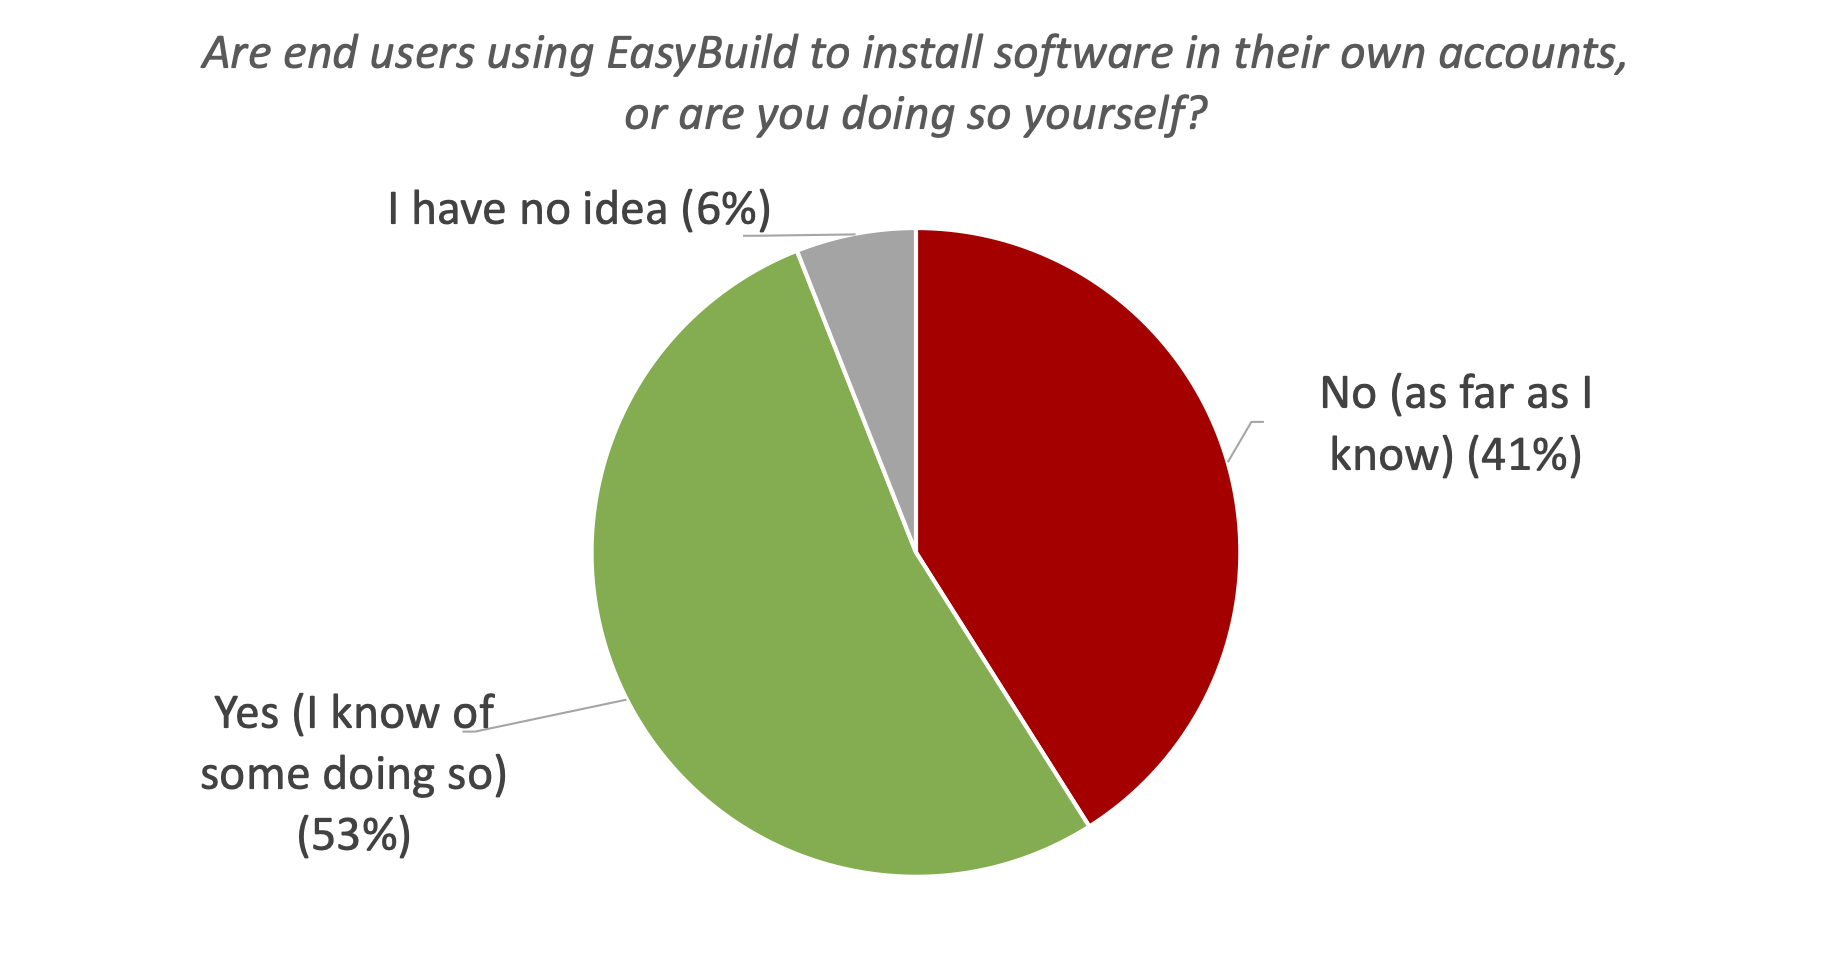 26. Are end users using EasyBuild to install software in their own accounts, or are you doing so yourself?